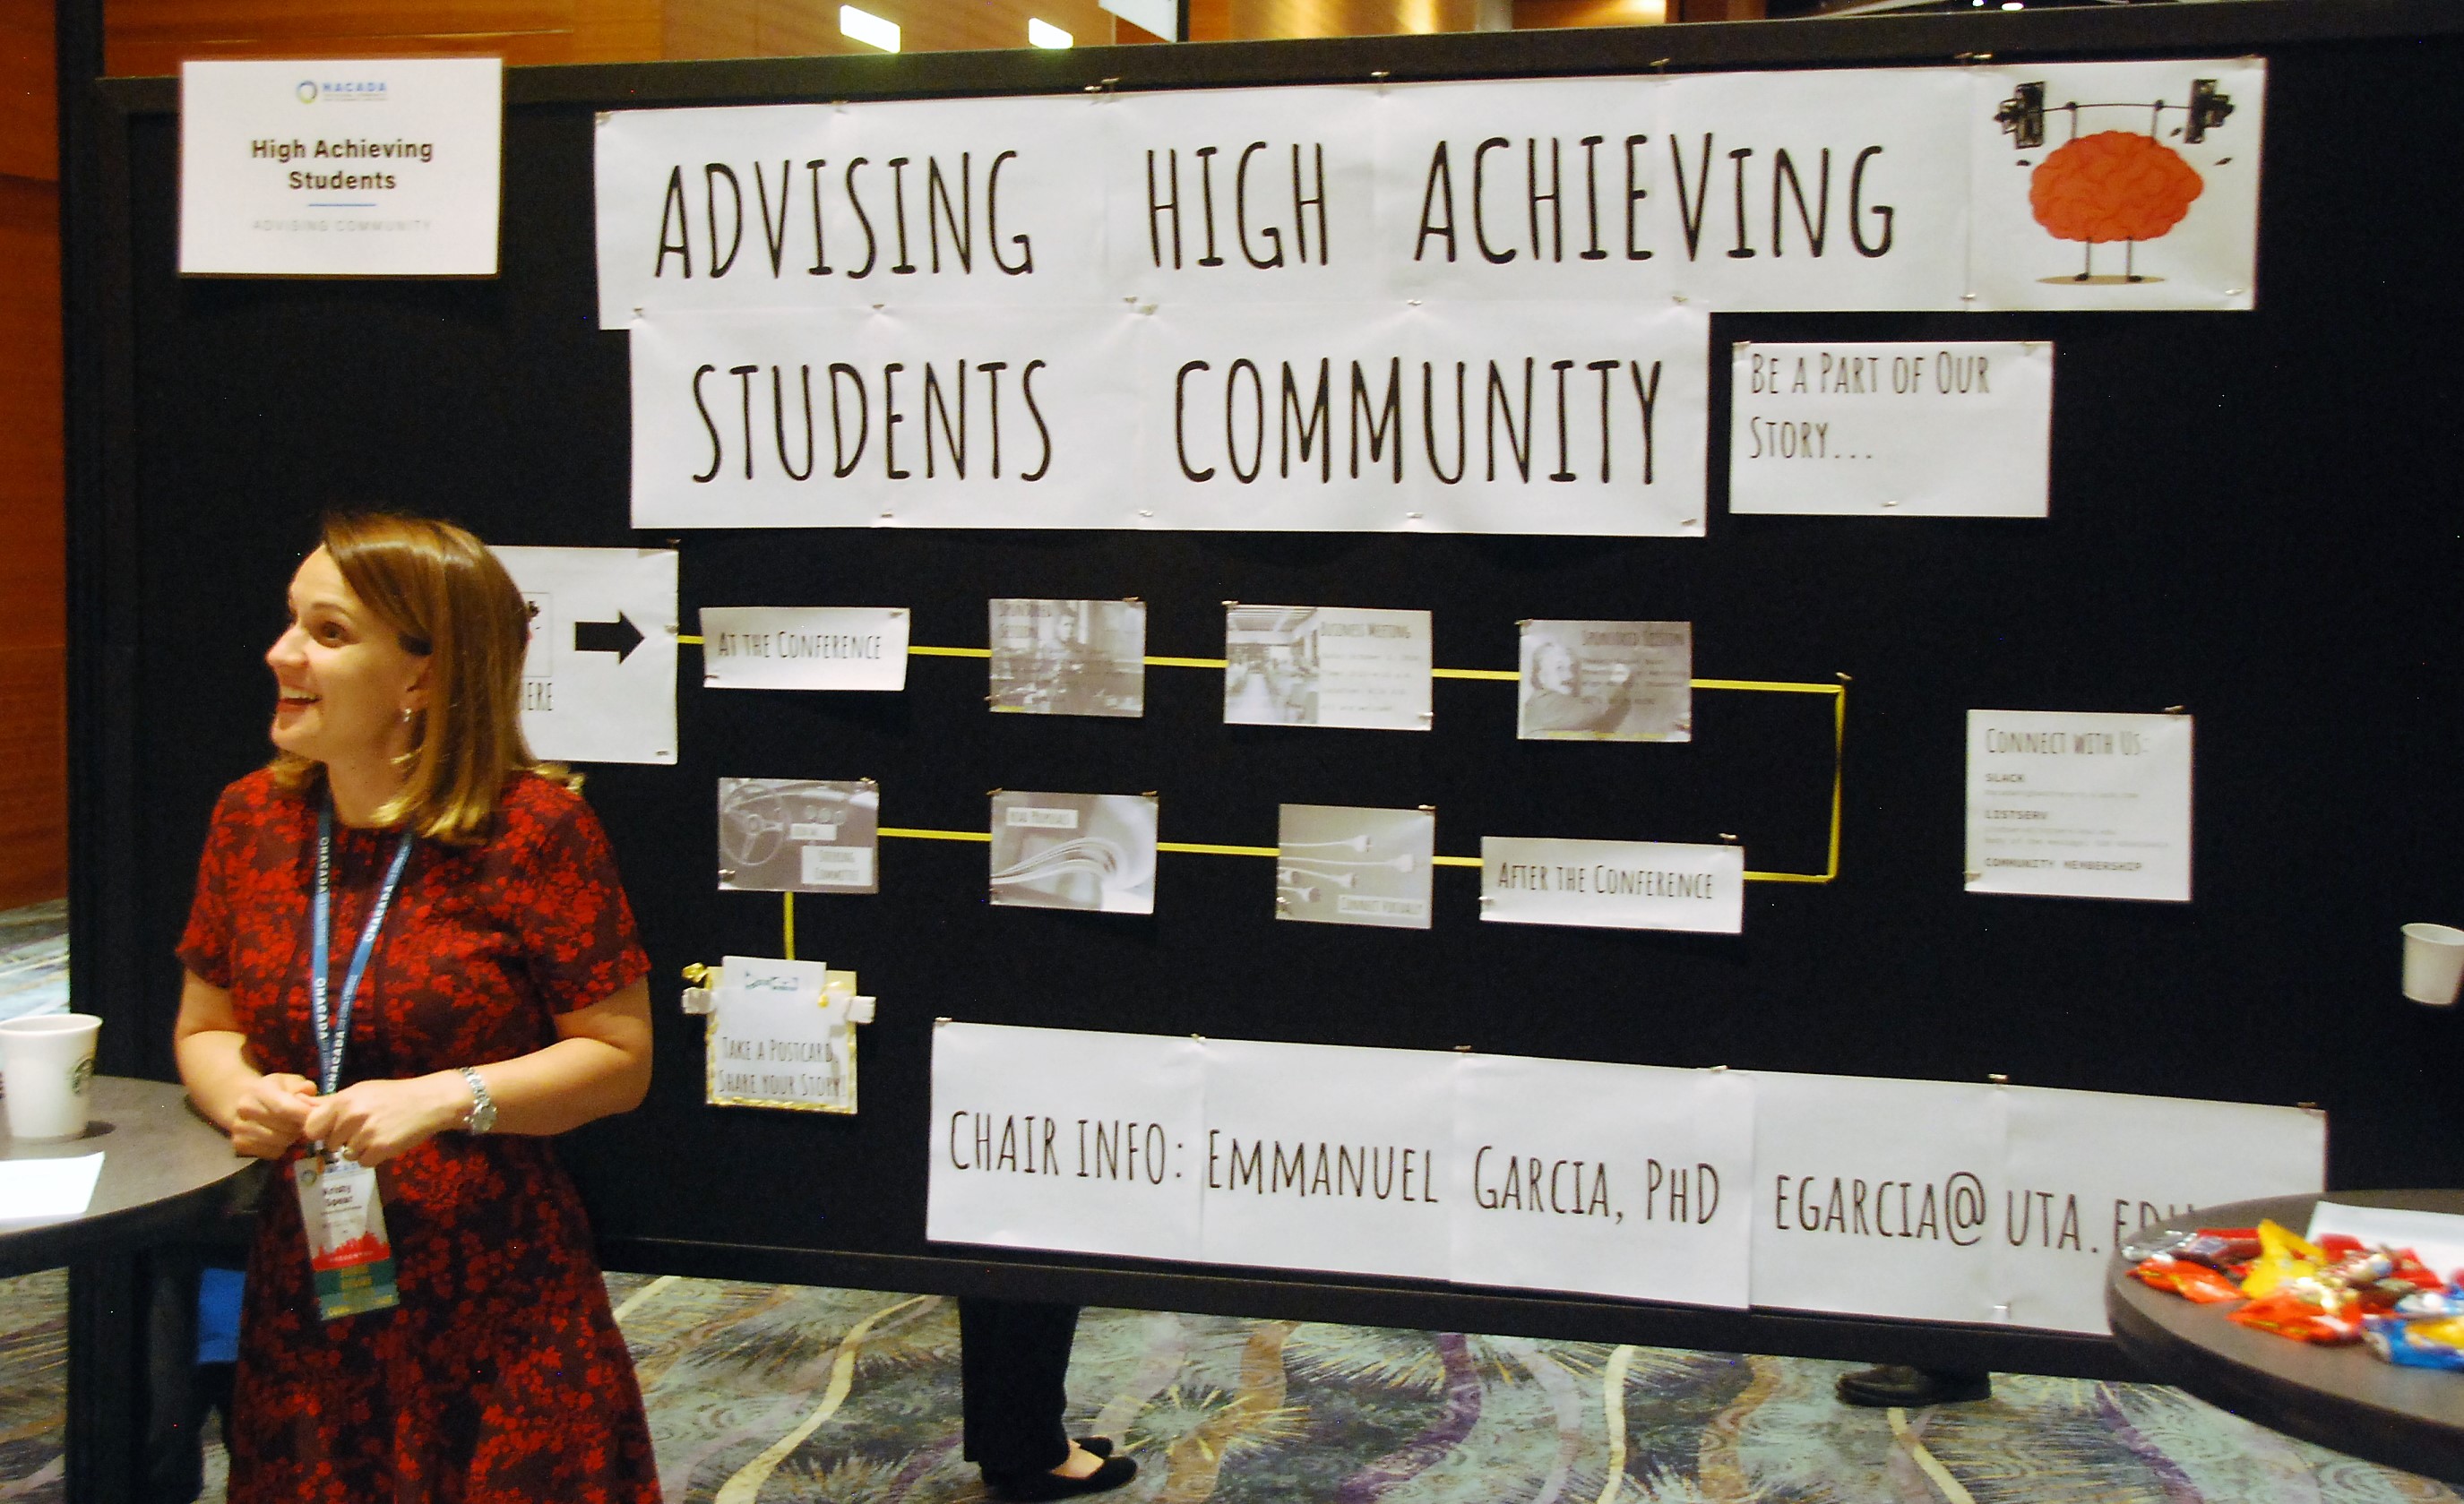 Advising High Achieving Students at poster fair